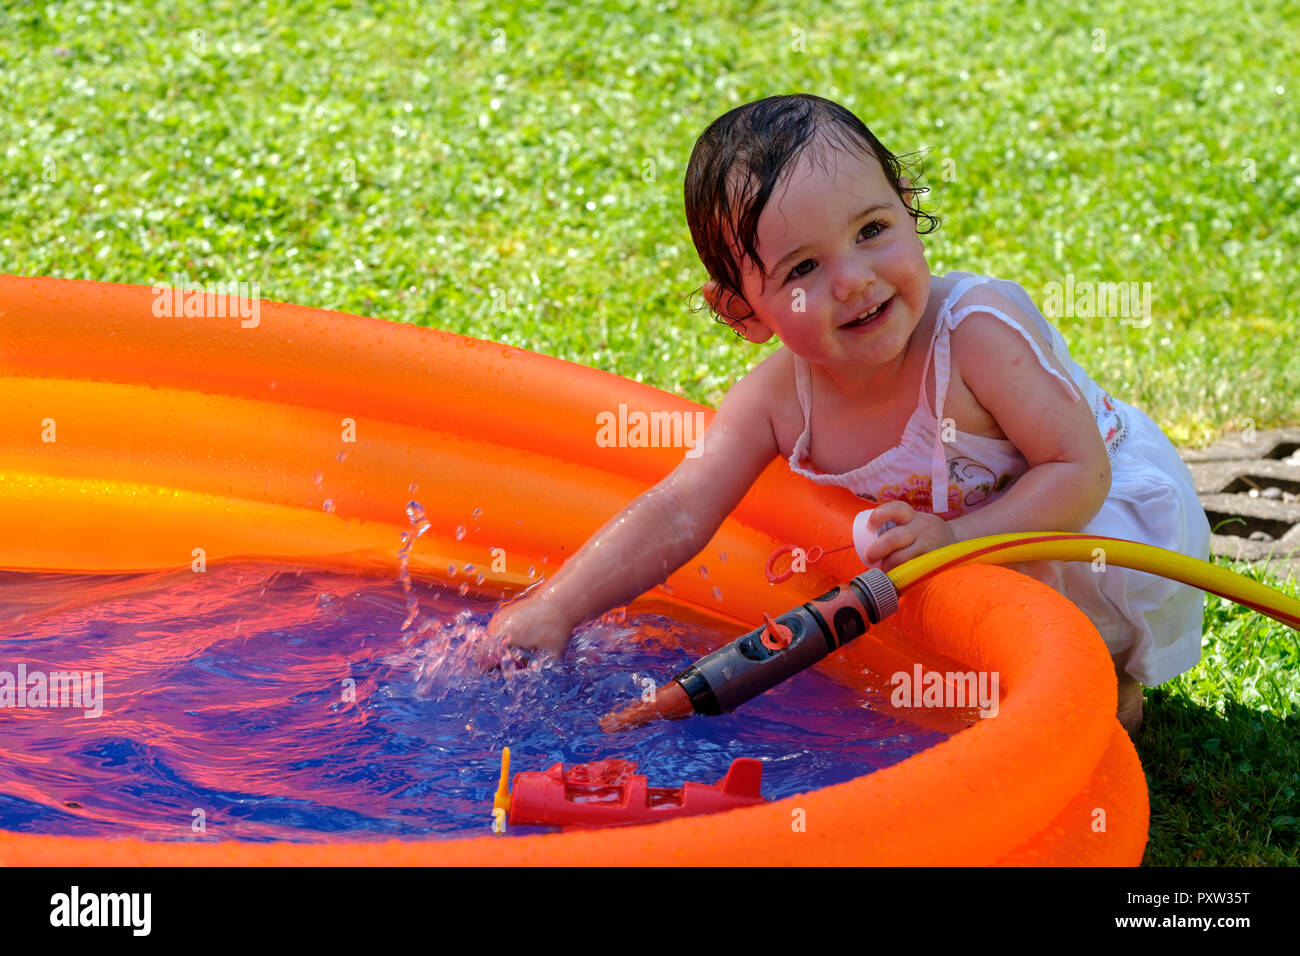 Portrait of smiling baby girl splashing with water in a paddling pool in the garden Stock Photo